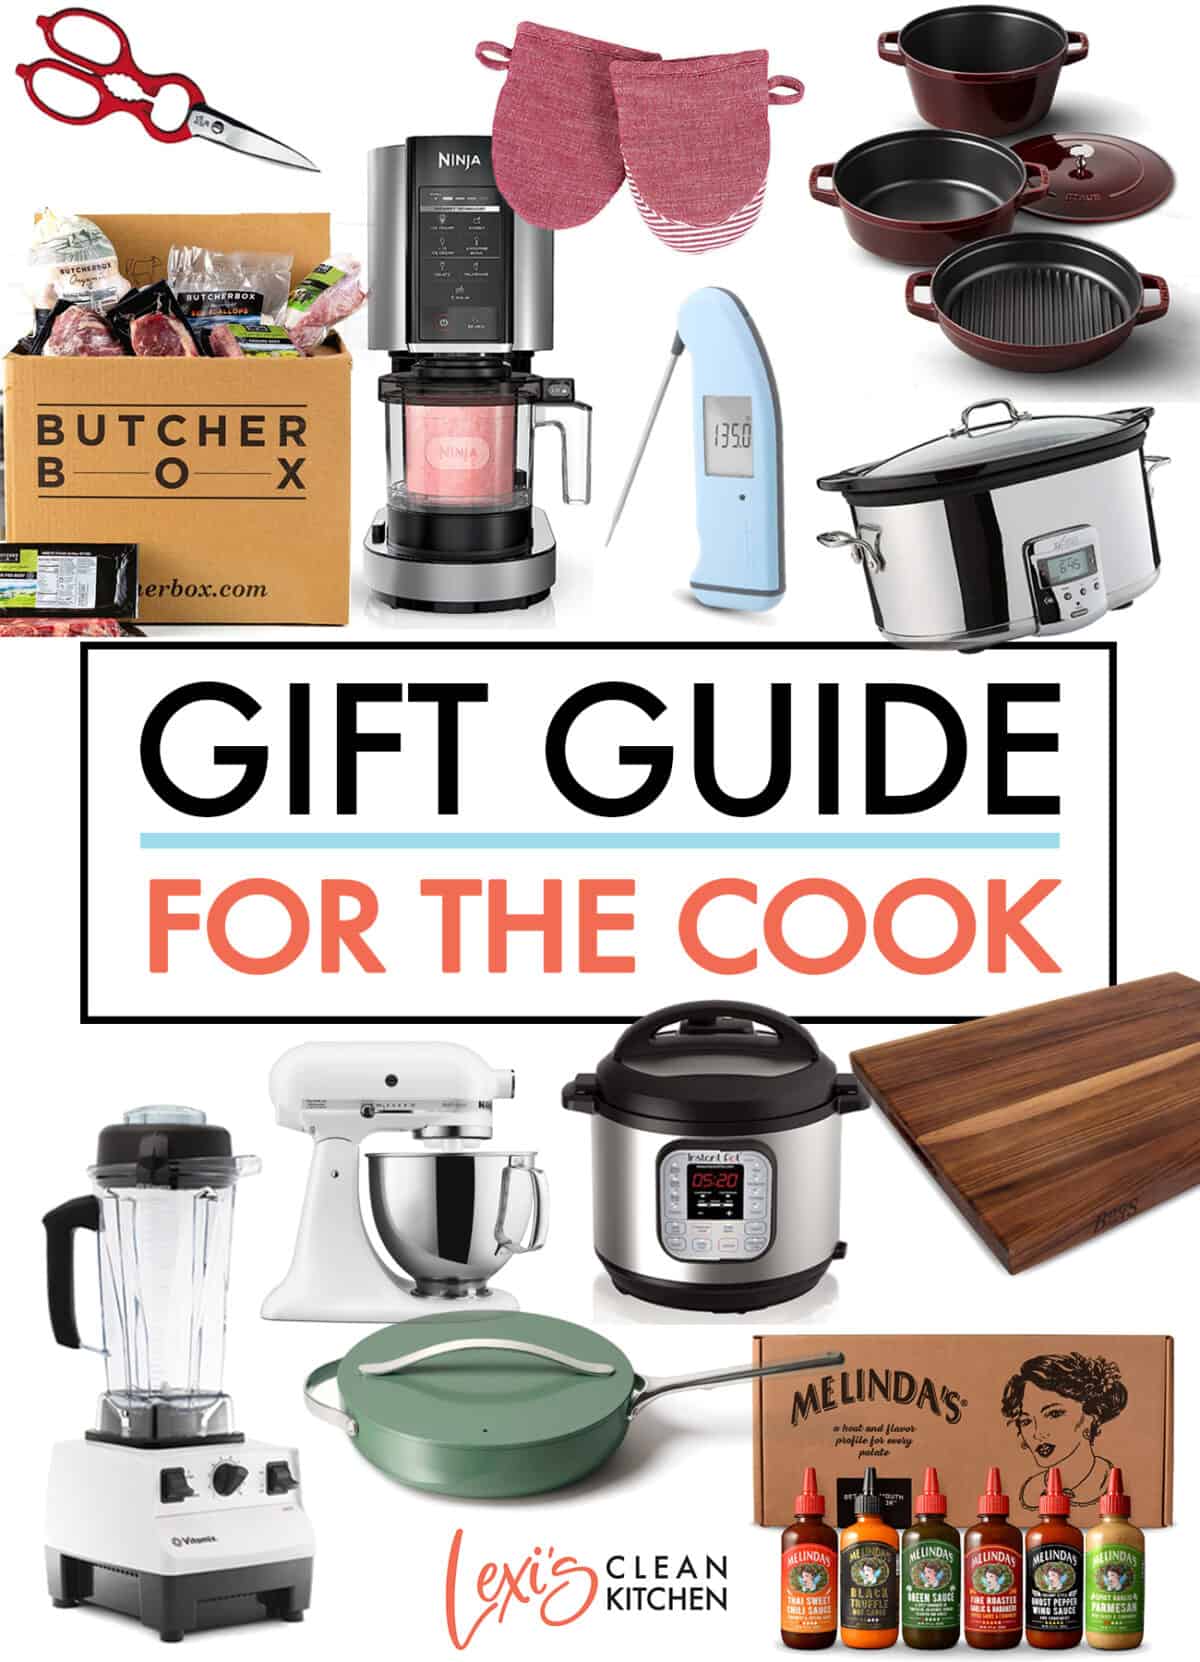 Kitchen Gift Guide 2021 - Tools and Supplies - A Cozy Kitchen